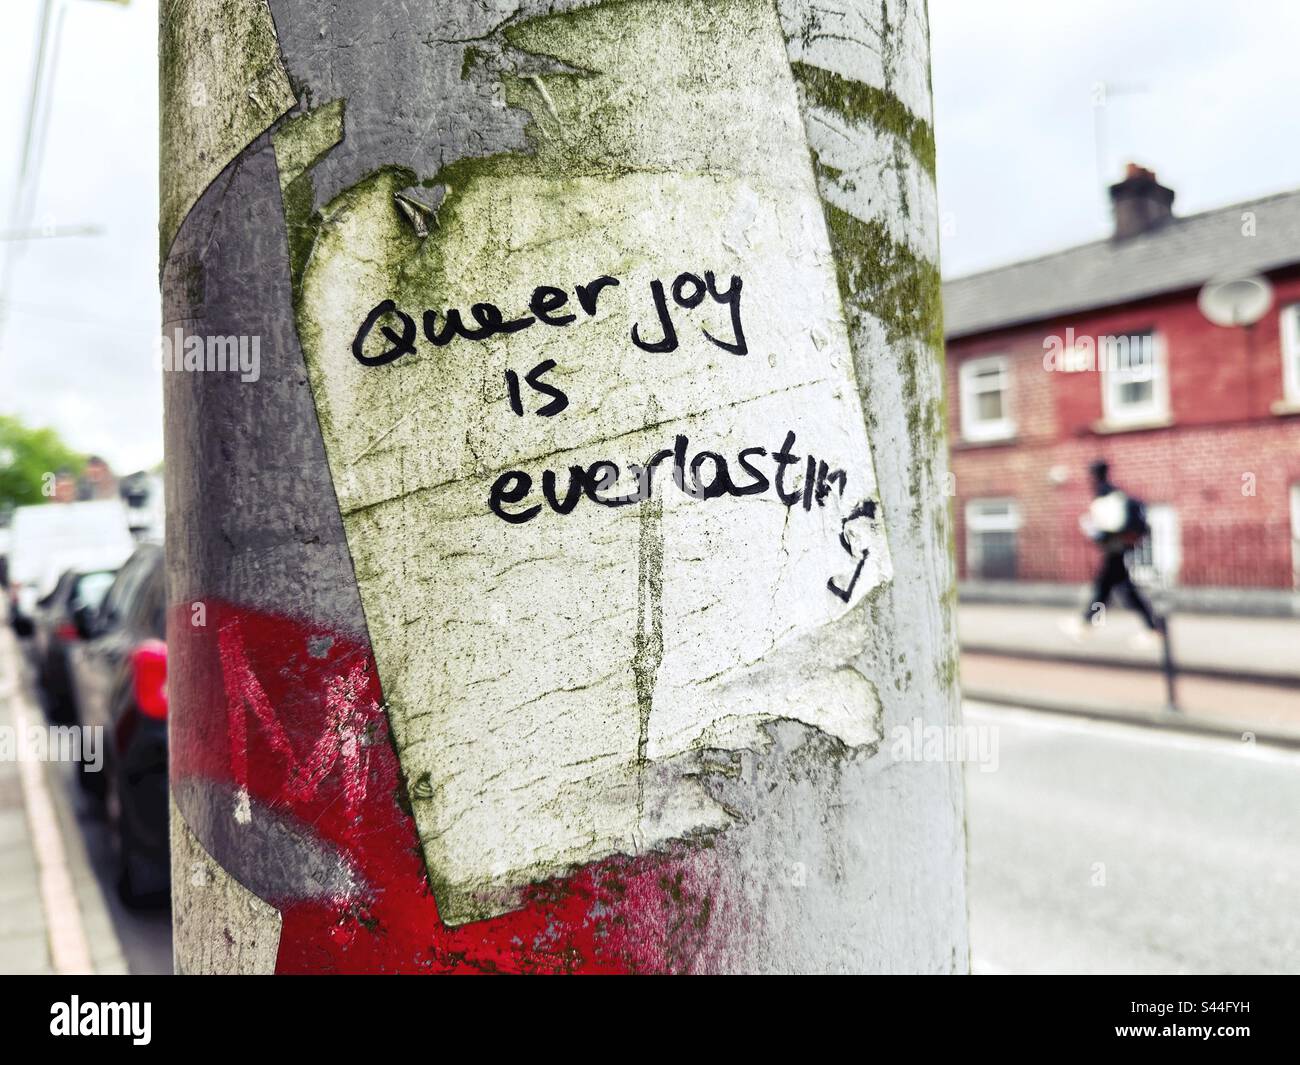 Graffiti on a post that reads queer joy is everlasting. Stock Photo